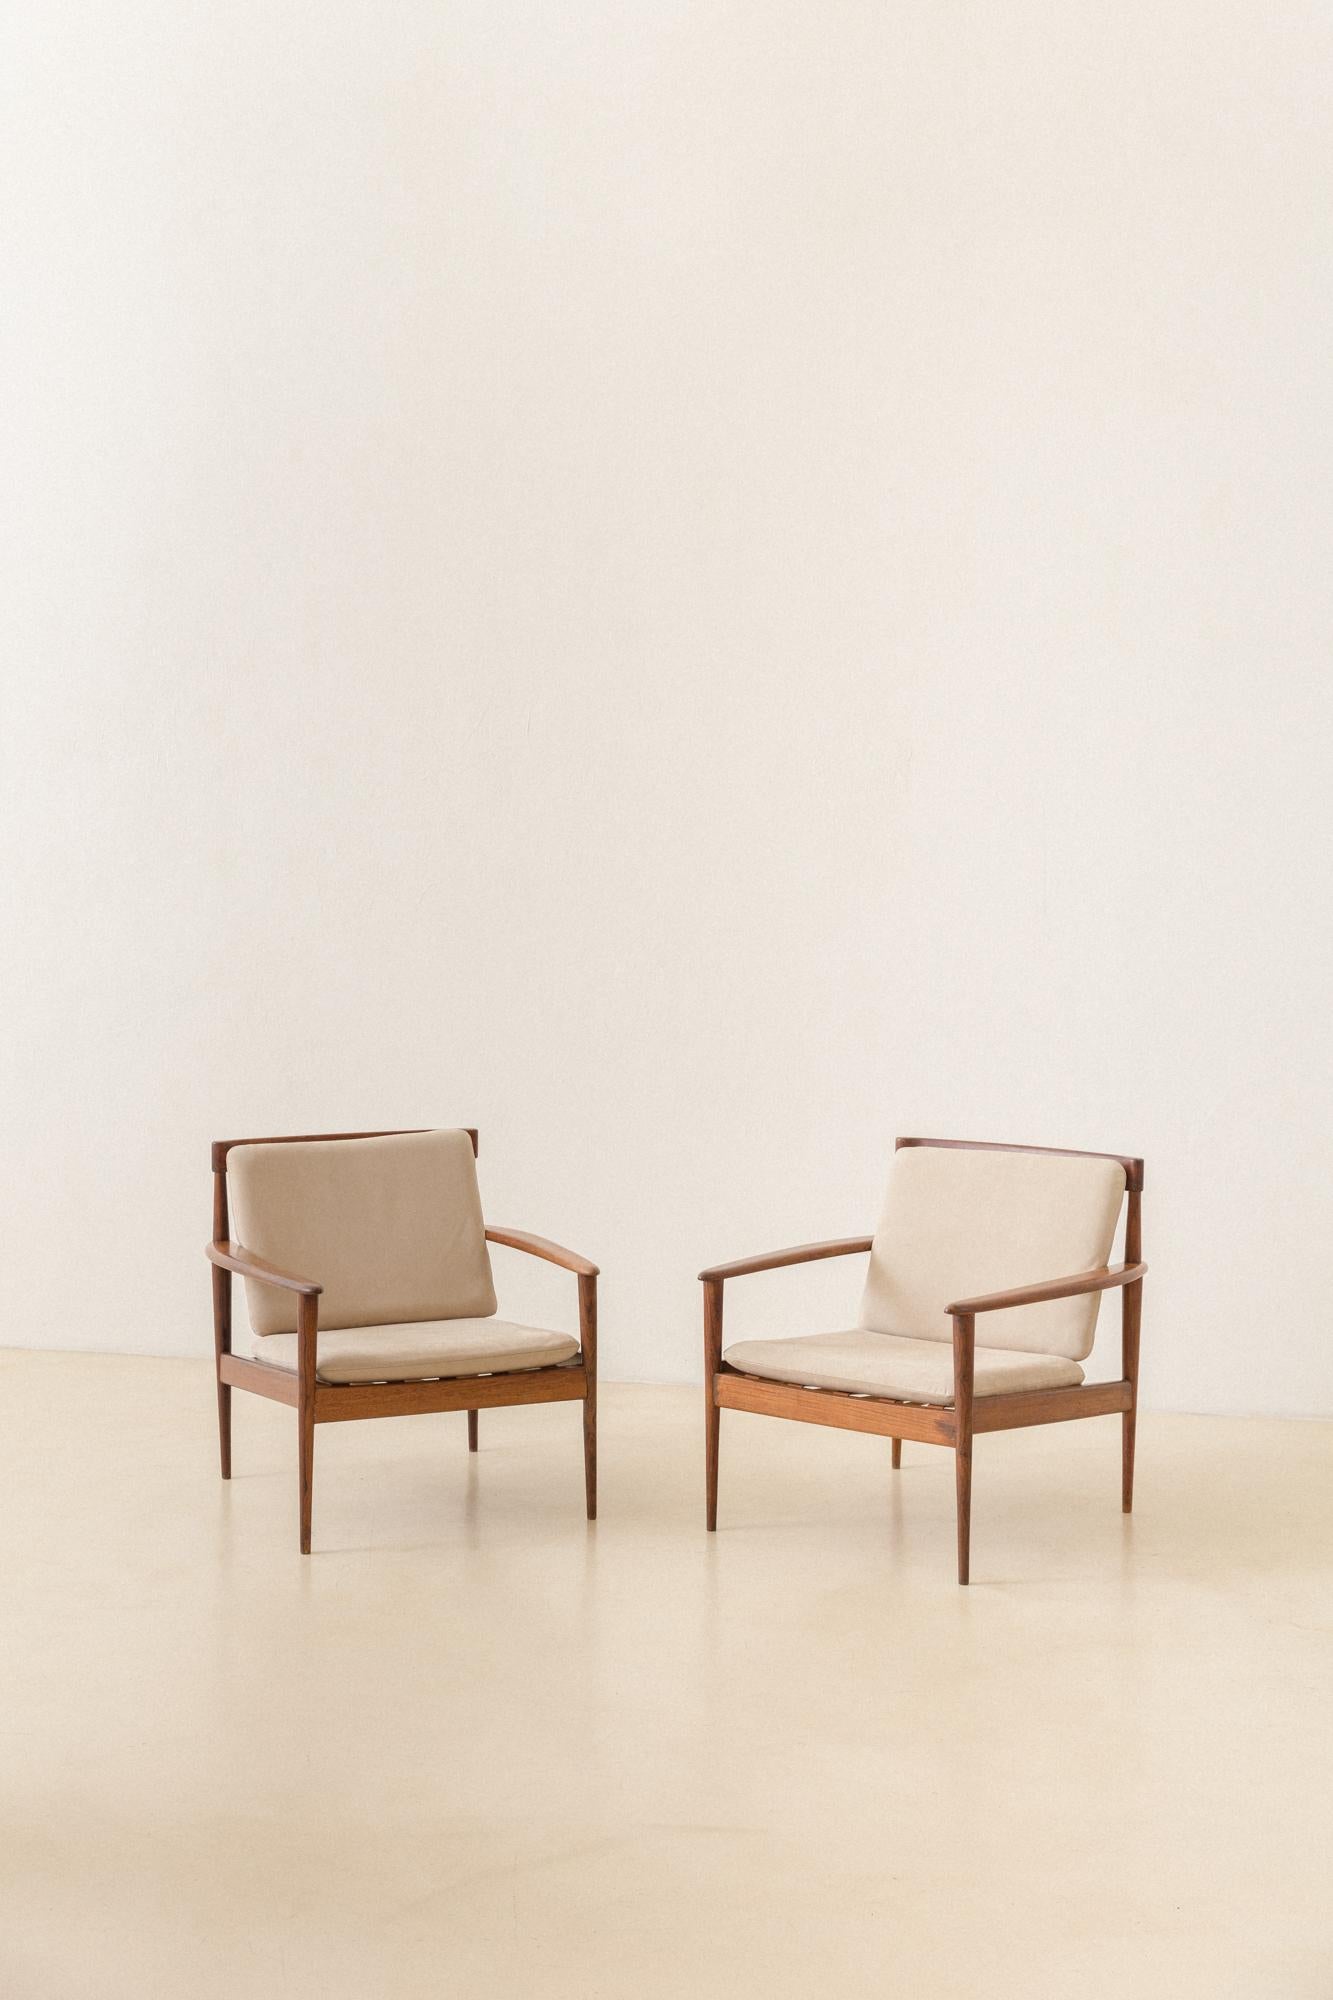 This gorgeous armchair was created by the Danish designer Grete Jalk and produced in Brazil in circa 1951 by Móveis Ambiente under the order of the architect and designer Rino Levi. The model is a design for Residencia Milton Guper, built by Rino